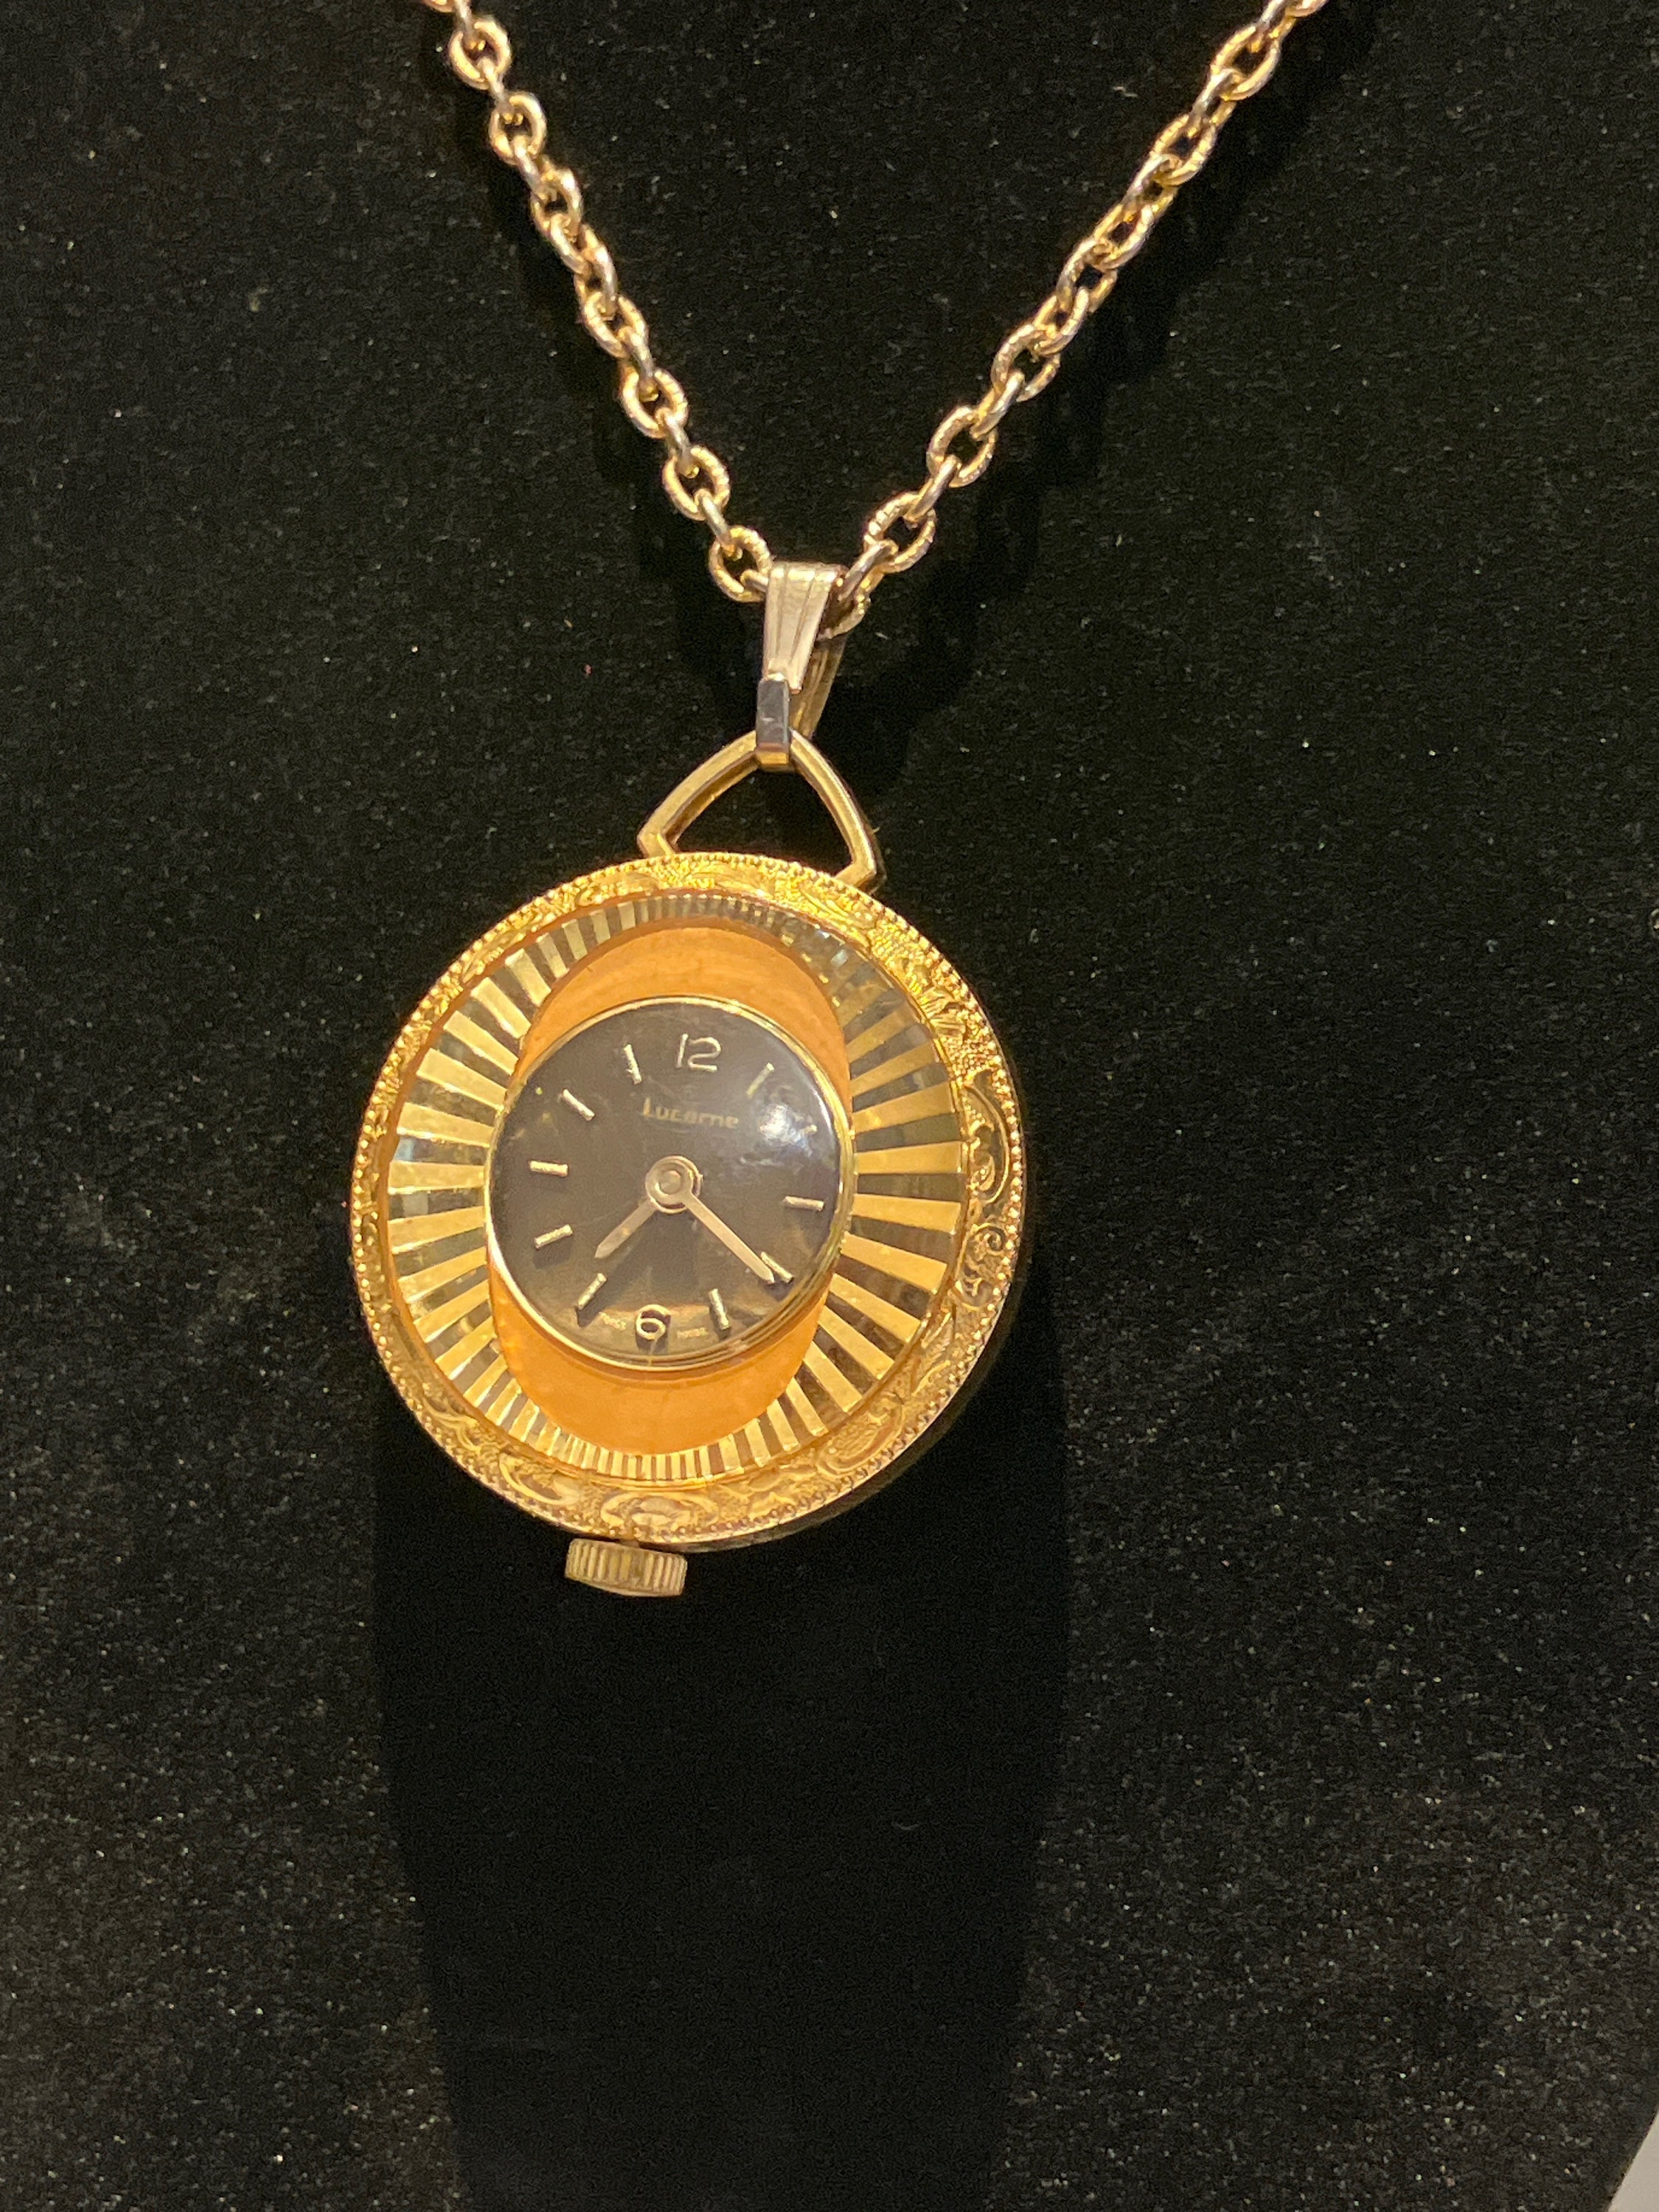 Vtg LUCERNE Watch Pendant Necklace SWISS Made Needs Serviced or Battery  Jewelry | eBay